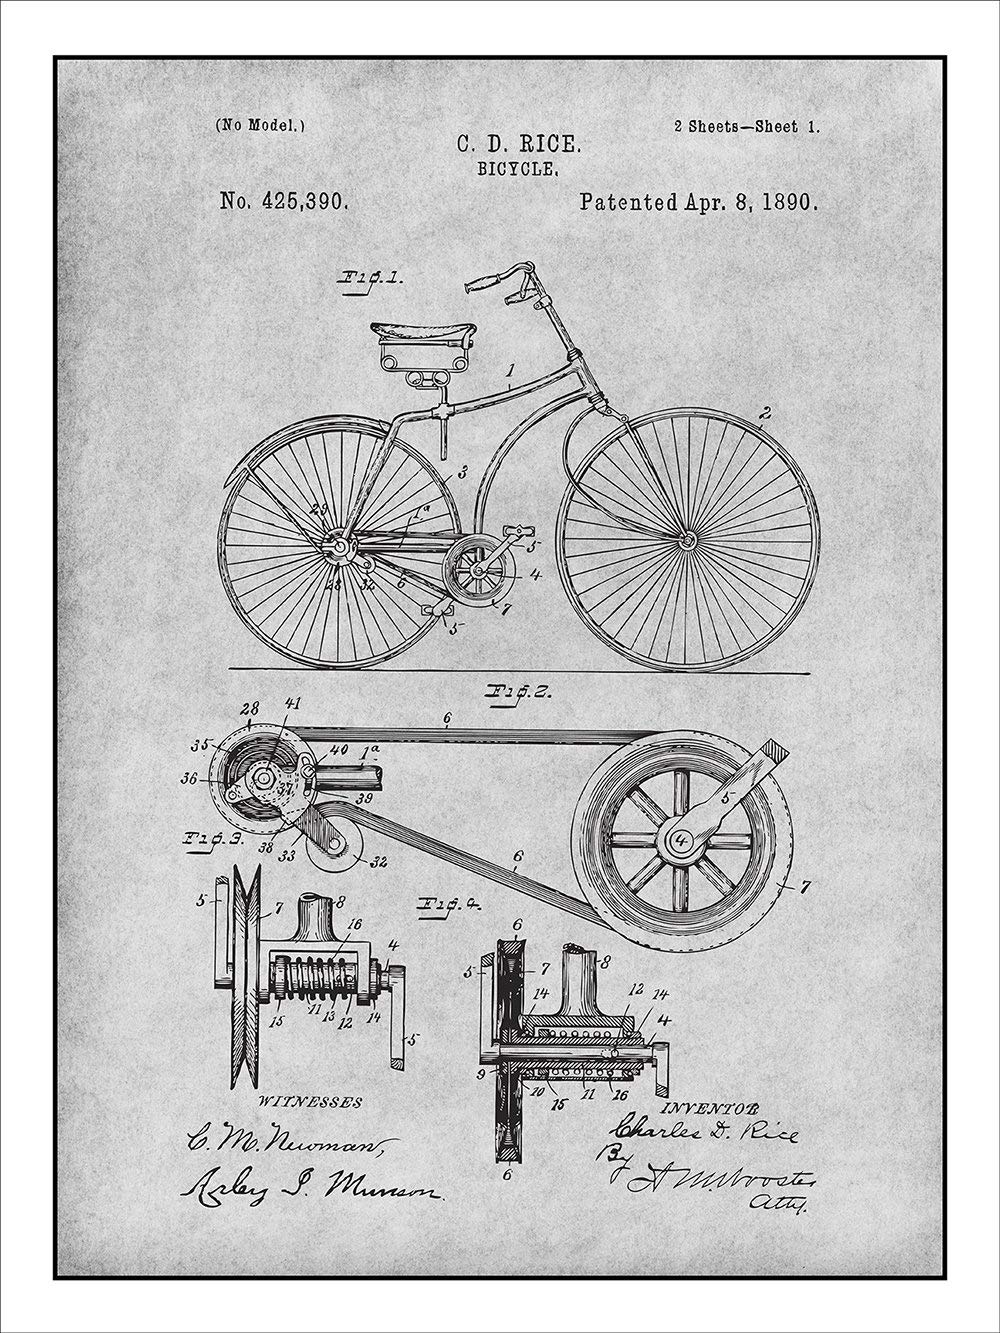 The History of Bicycles